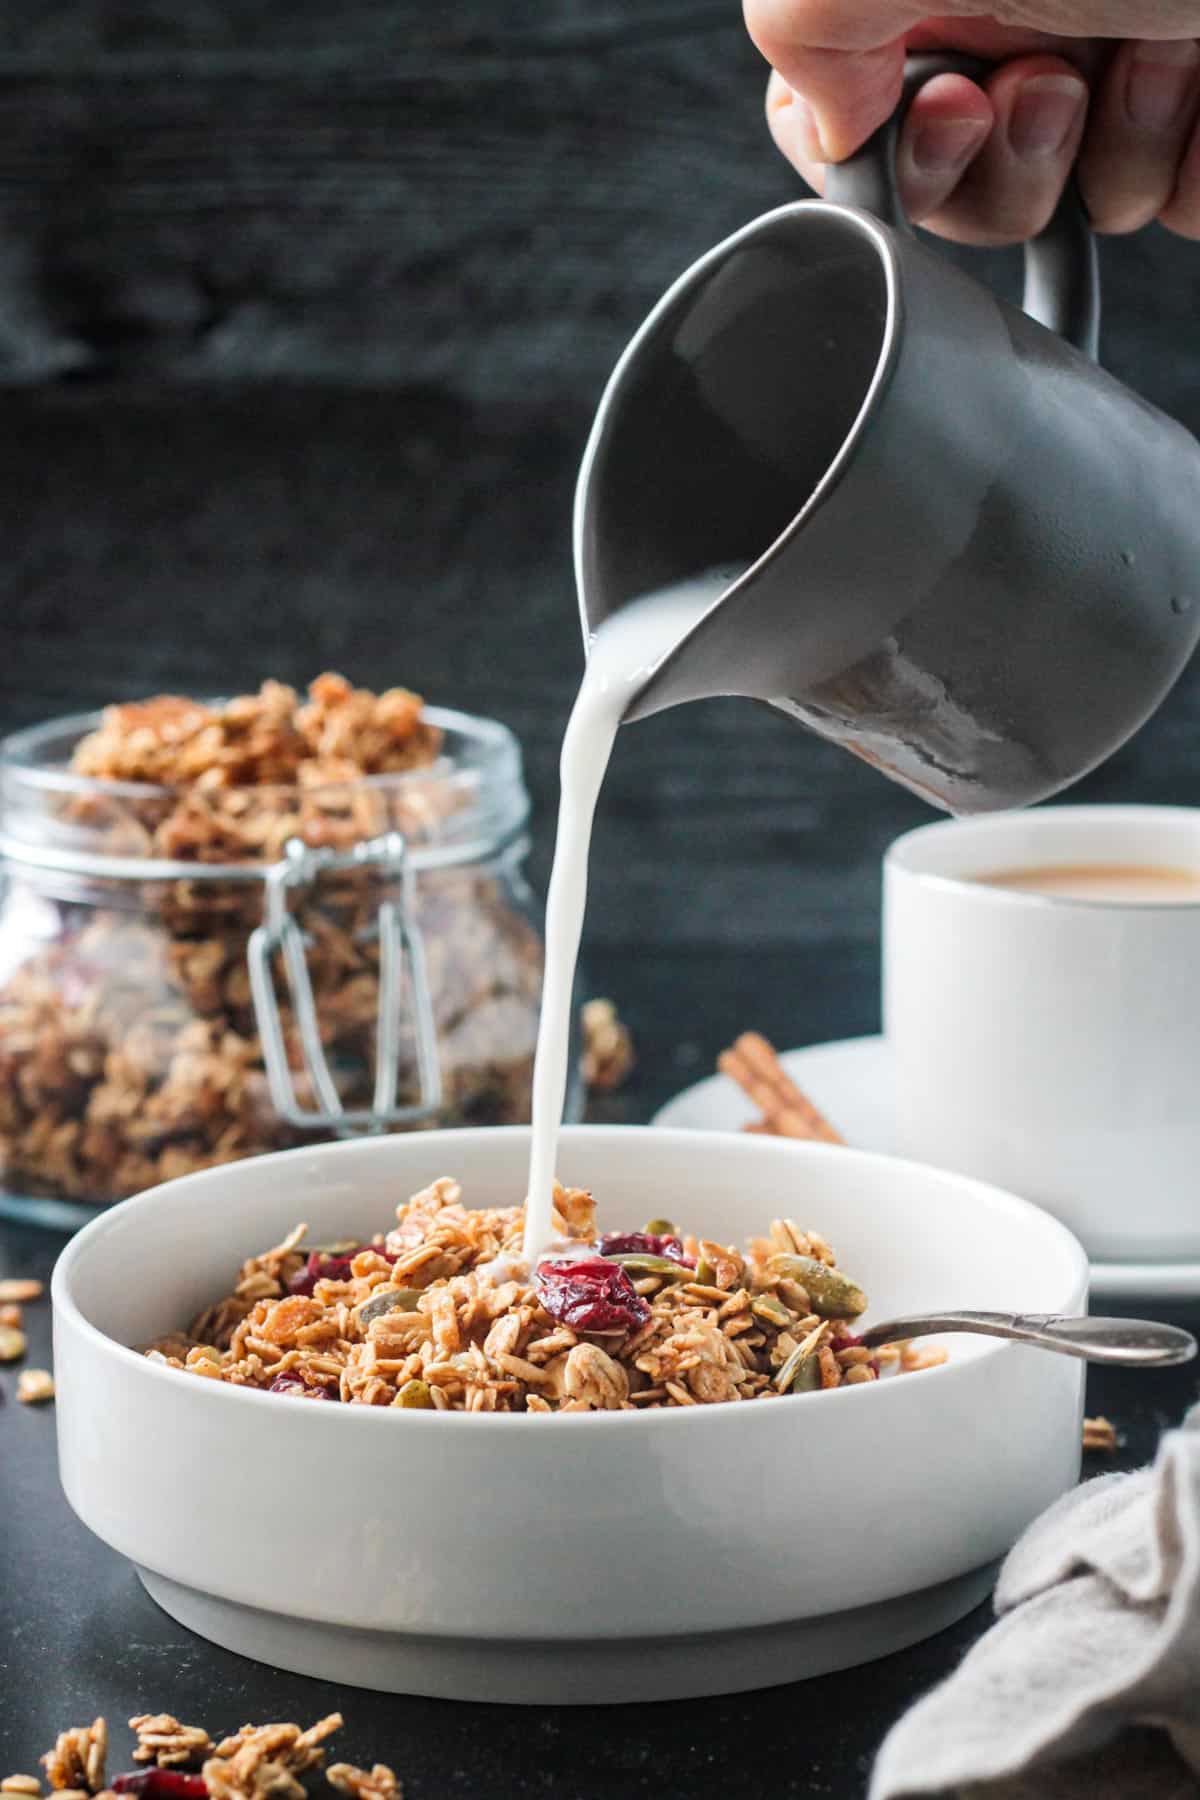 Milk being poured from a small pitcher into a bowl of granola.